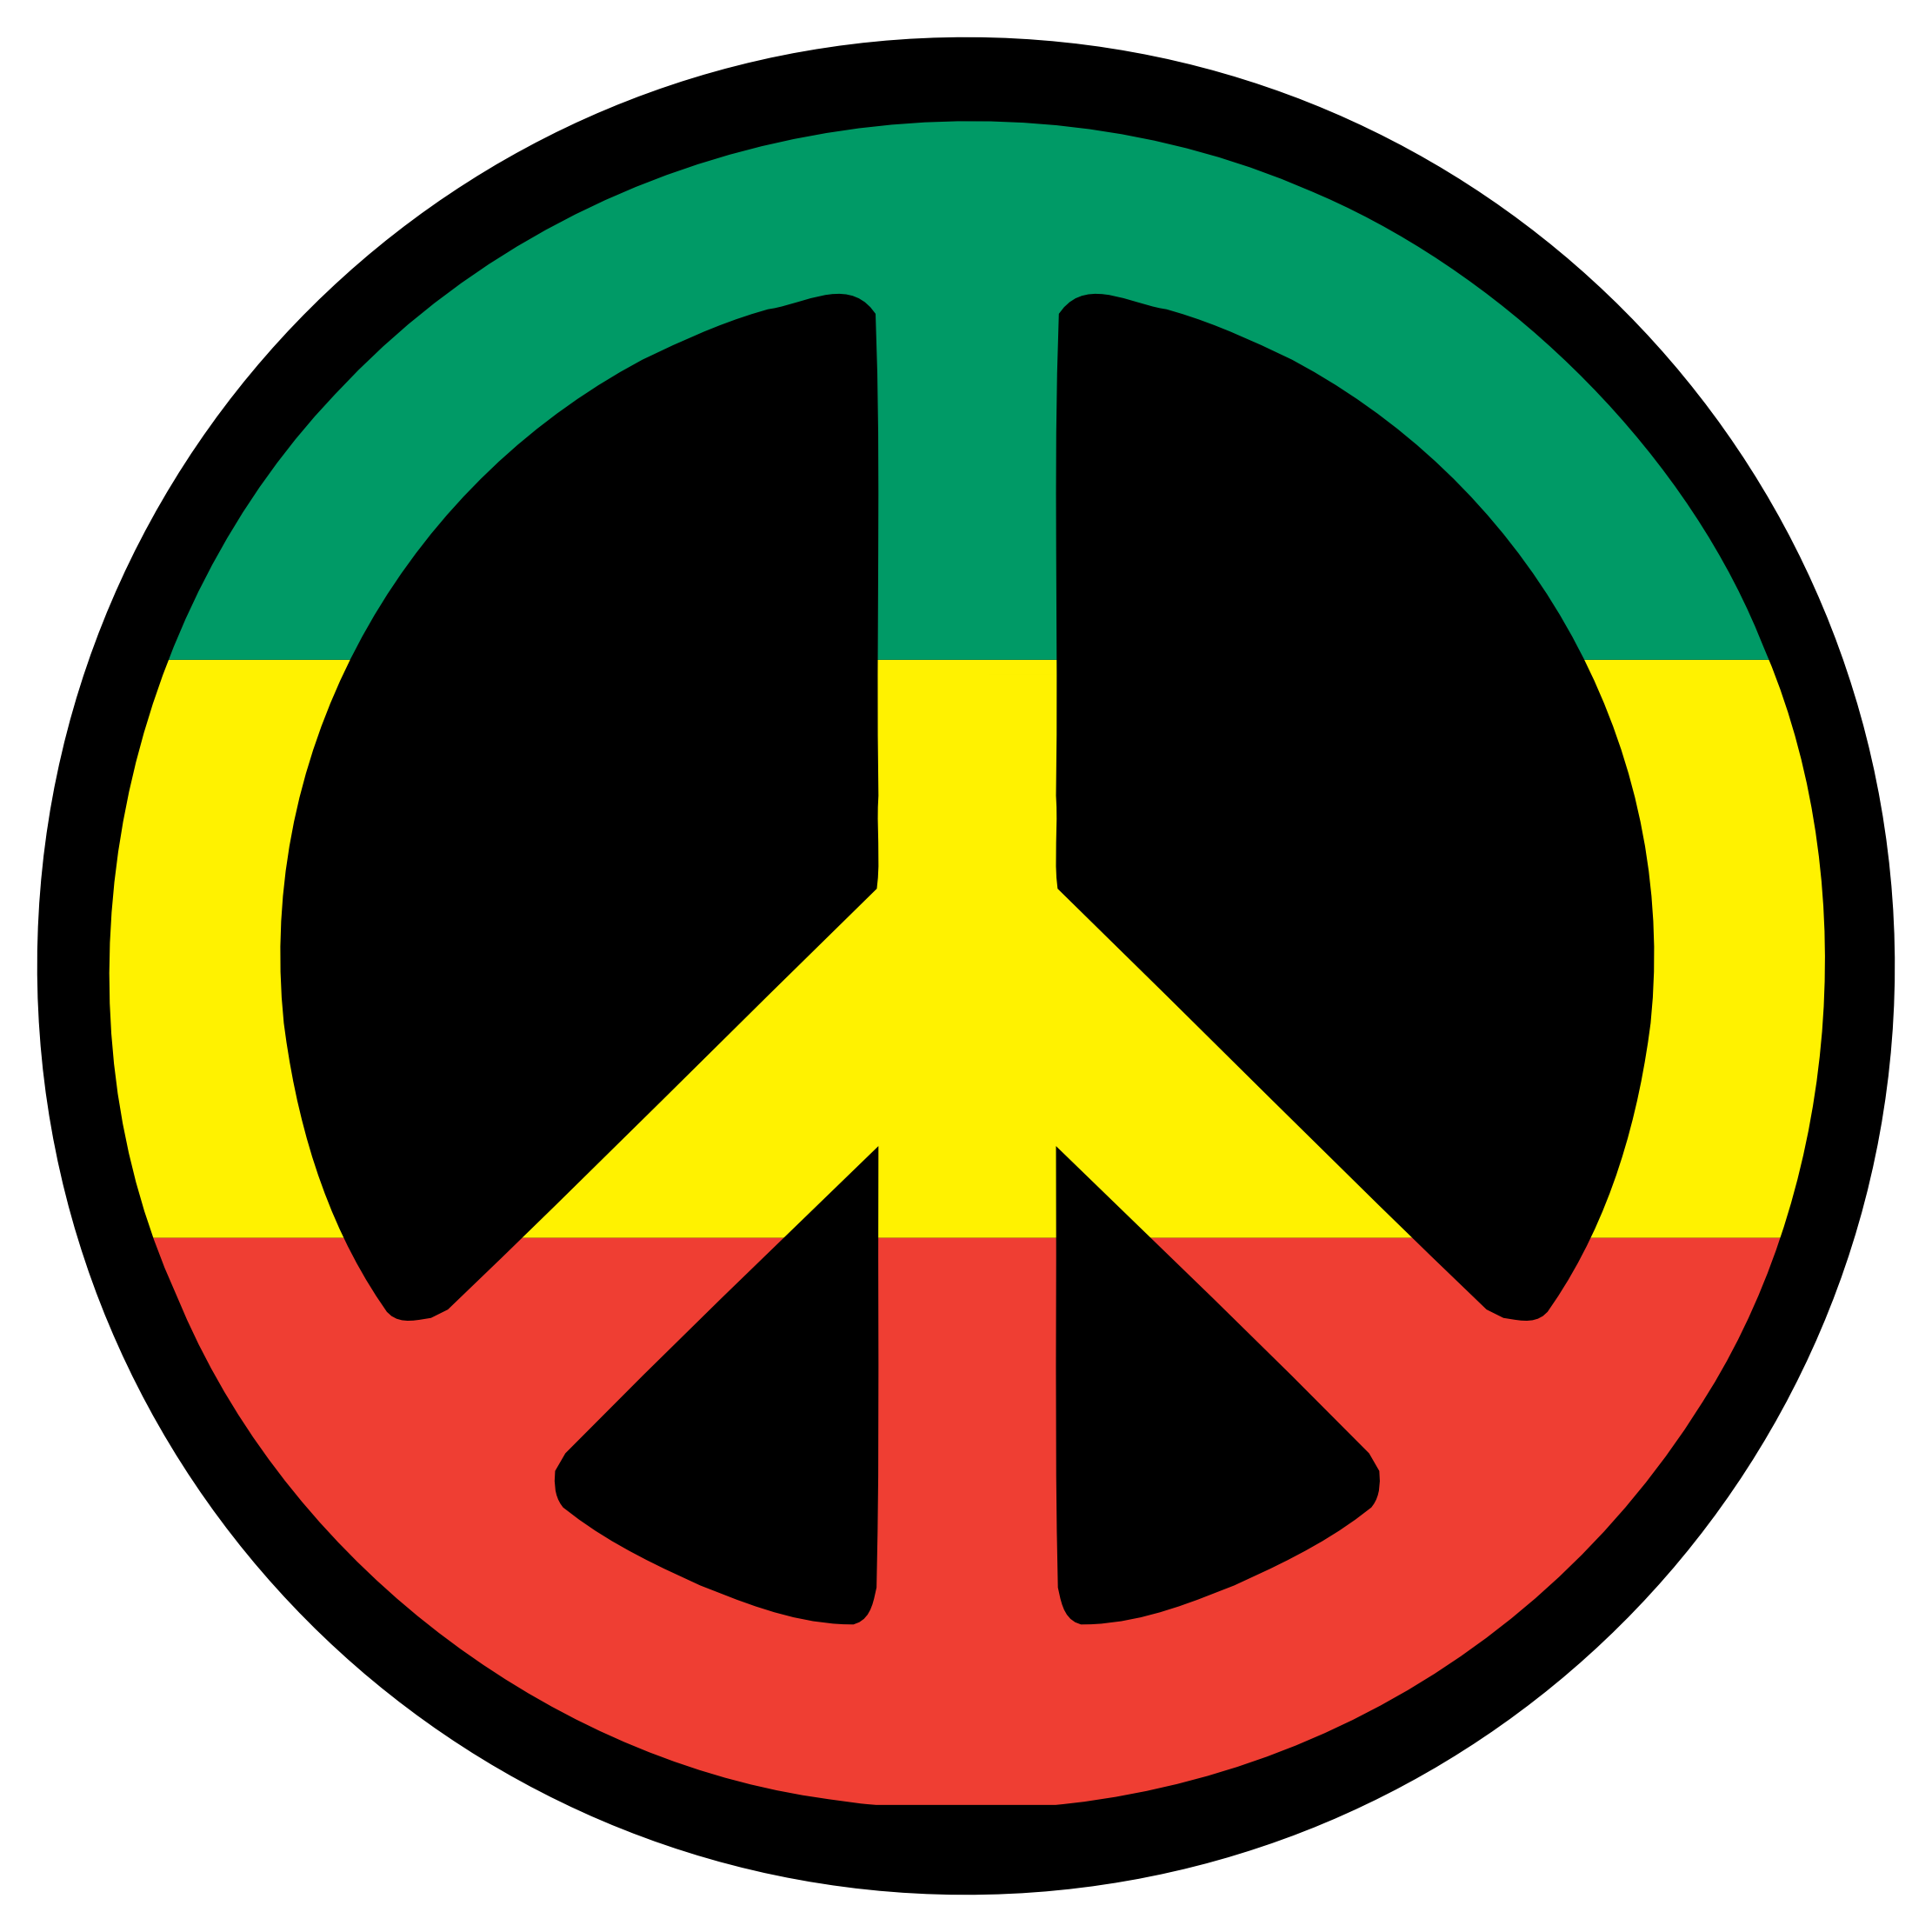 Pics Of Peace Signs - Clipart library